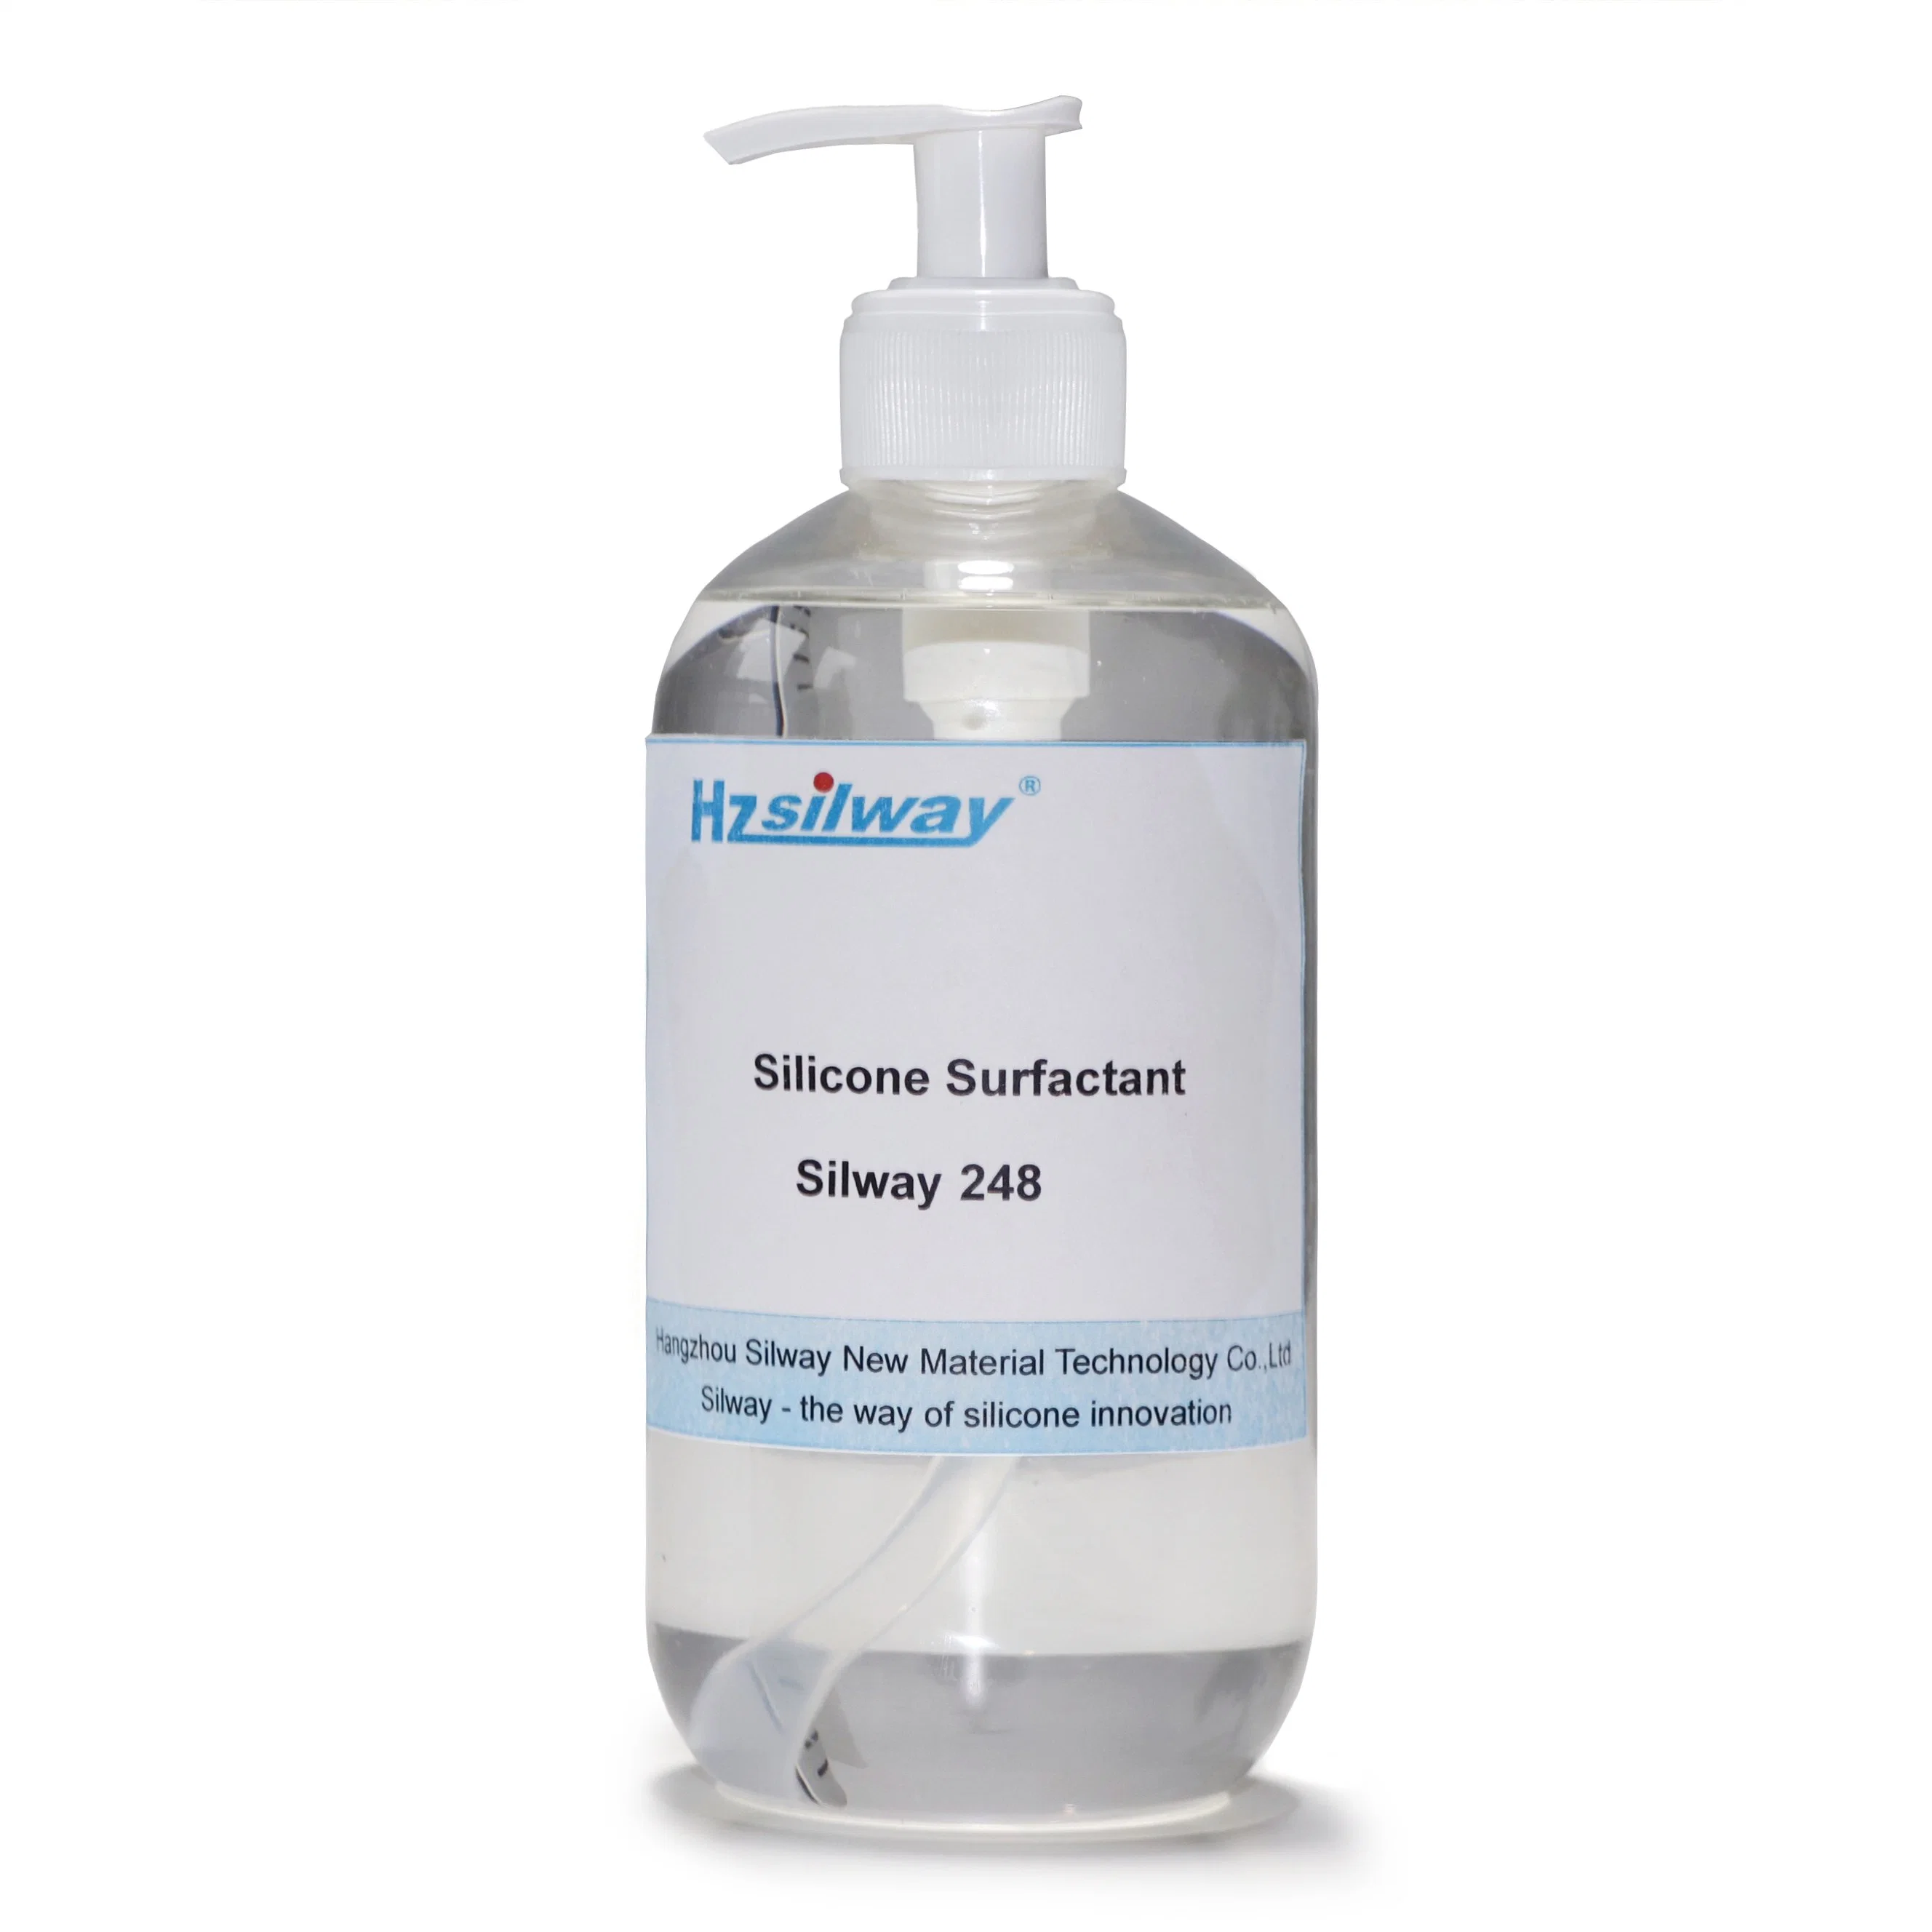 Excellent Spreading and Wetting Silicone Oil Surfactant Spray Adjuvant with Agrochemicals Promoting Performance of Pesticides